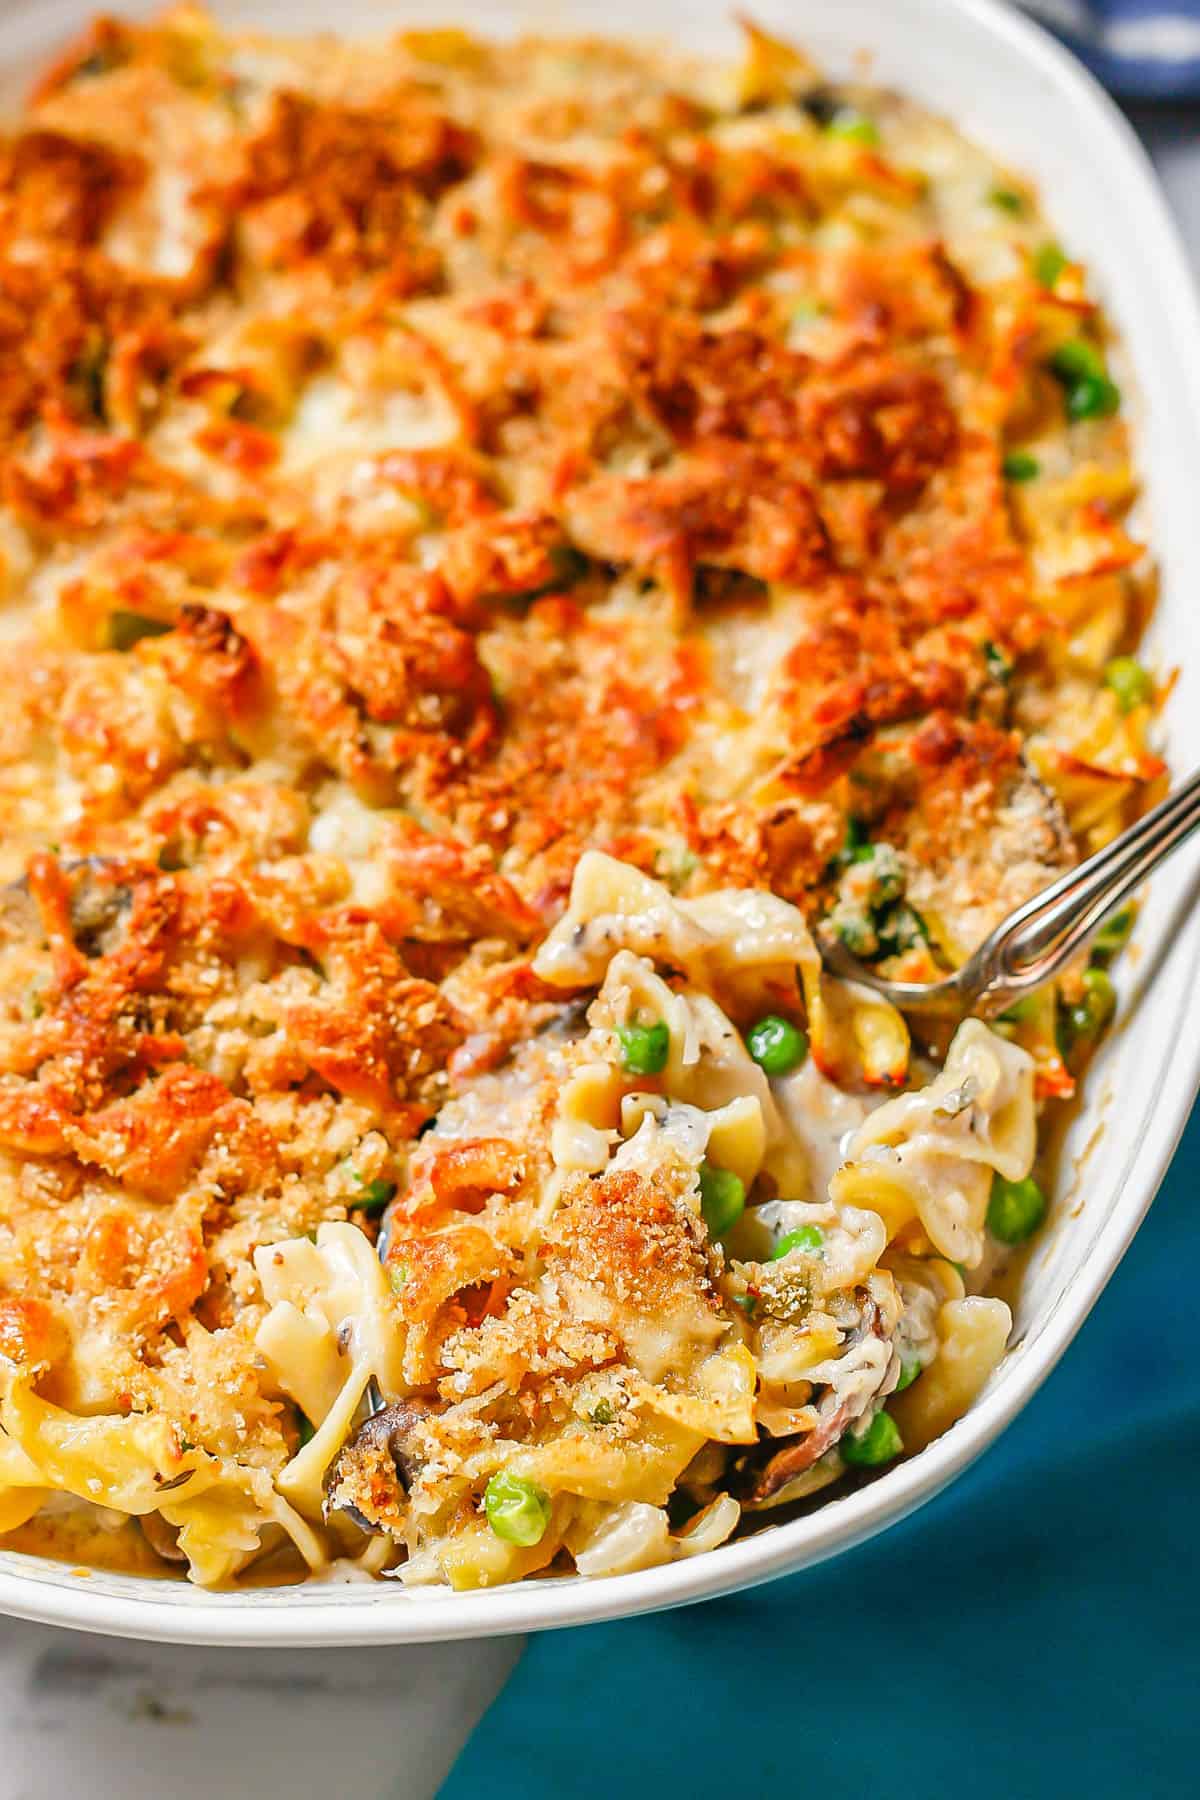 A scoop being taken out of a baked tuna noodle casserole with a crunchy browned breadcrumb topping.